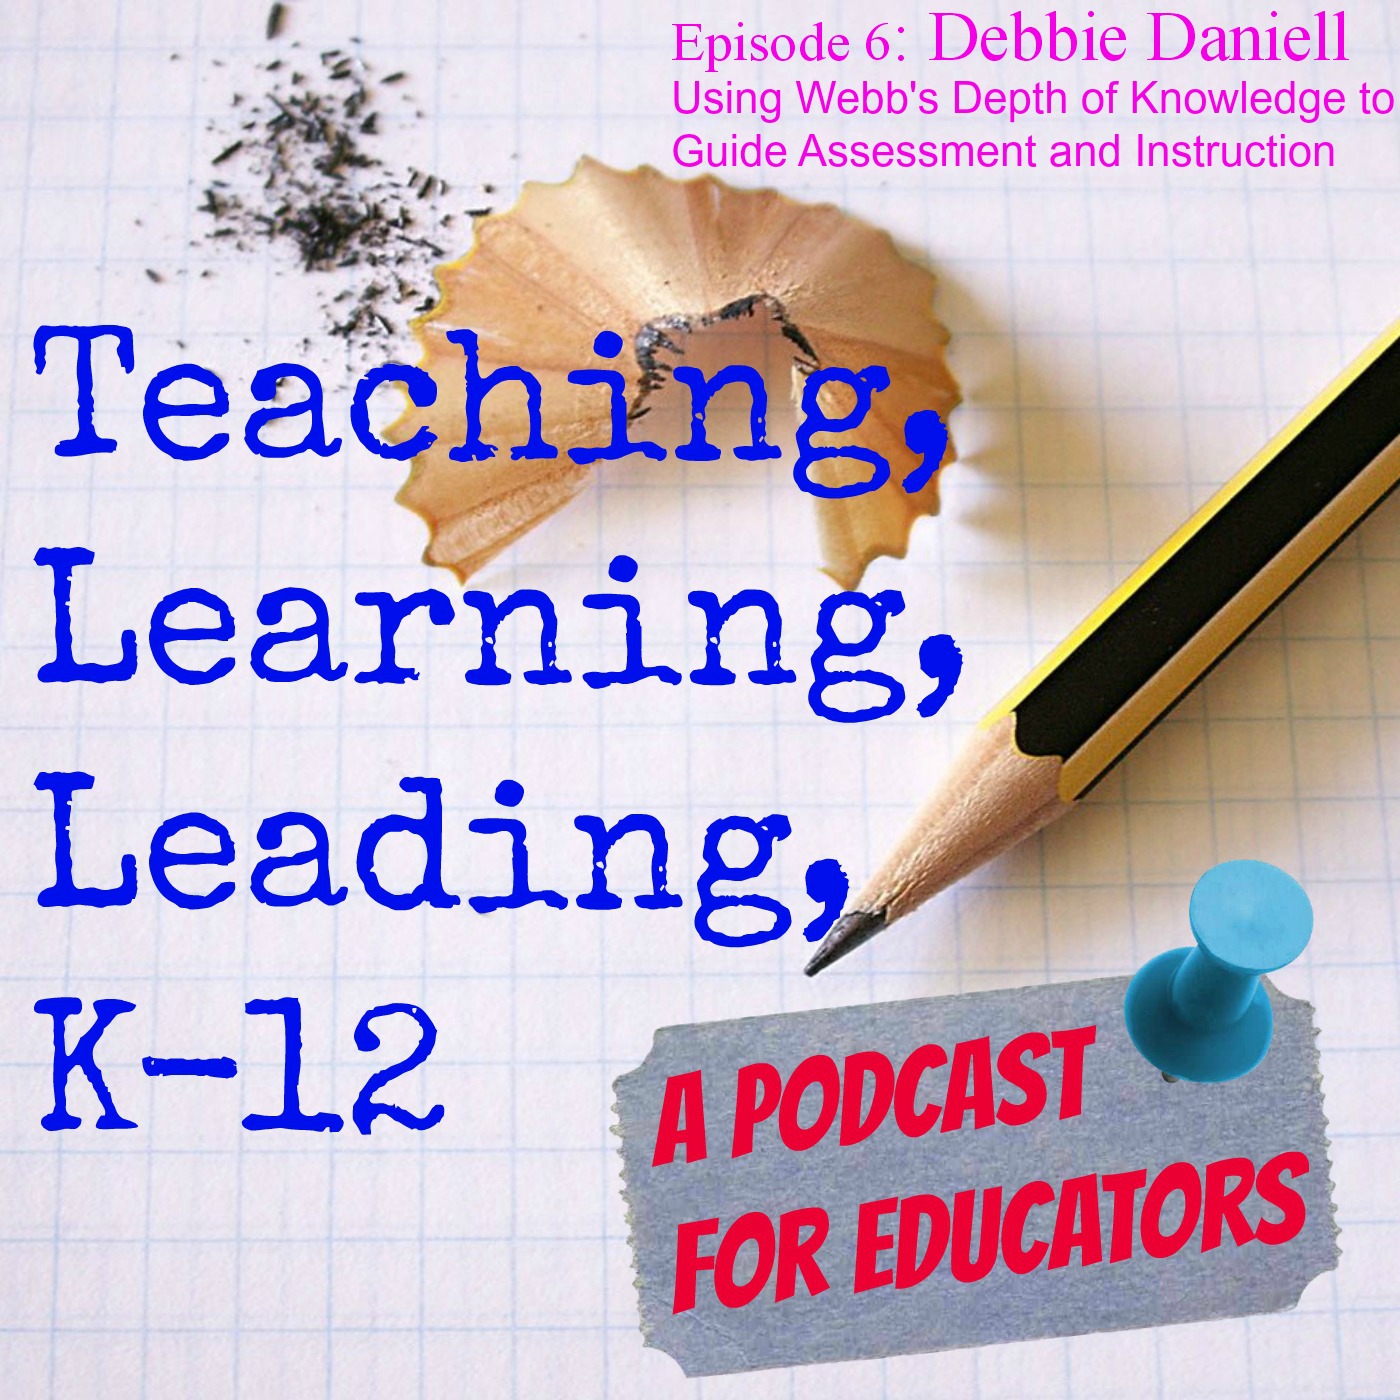 Episode 6: Debbie Daniell/ Using Webb's Depth of Knowledge to Guide Assessment and Instruction